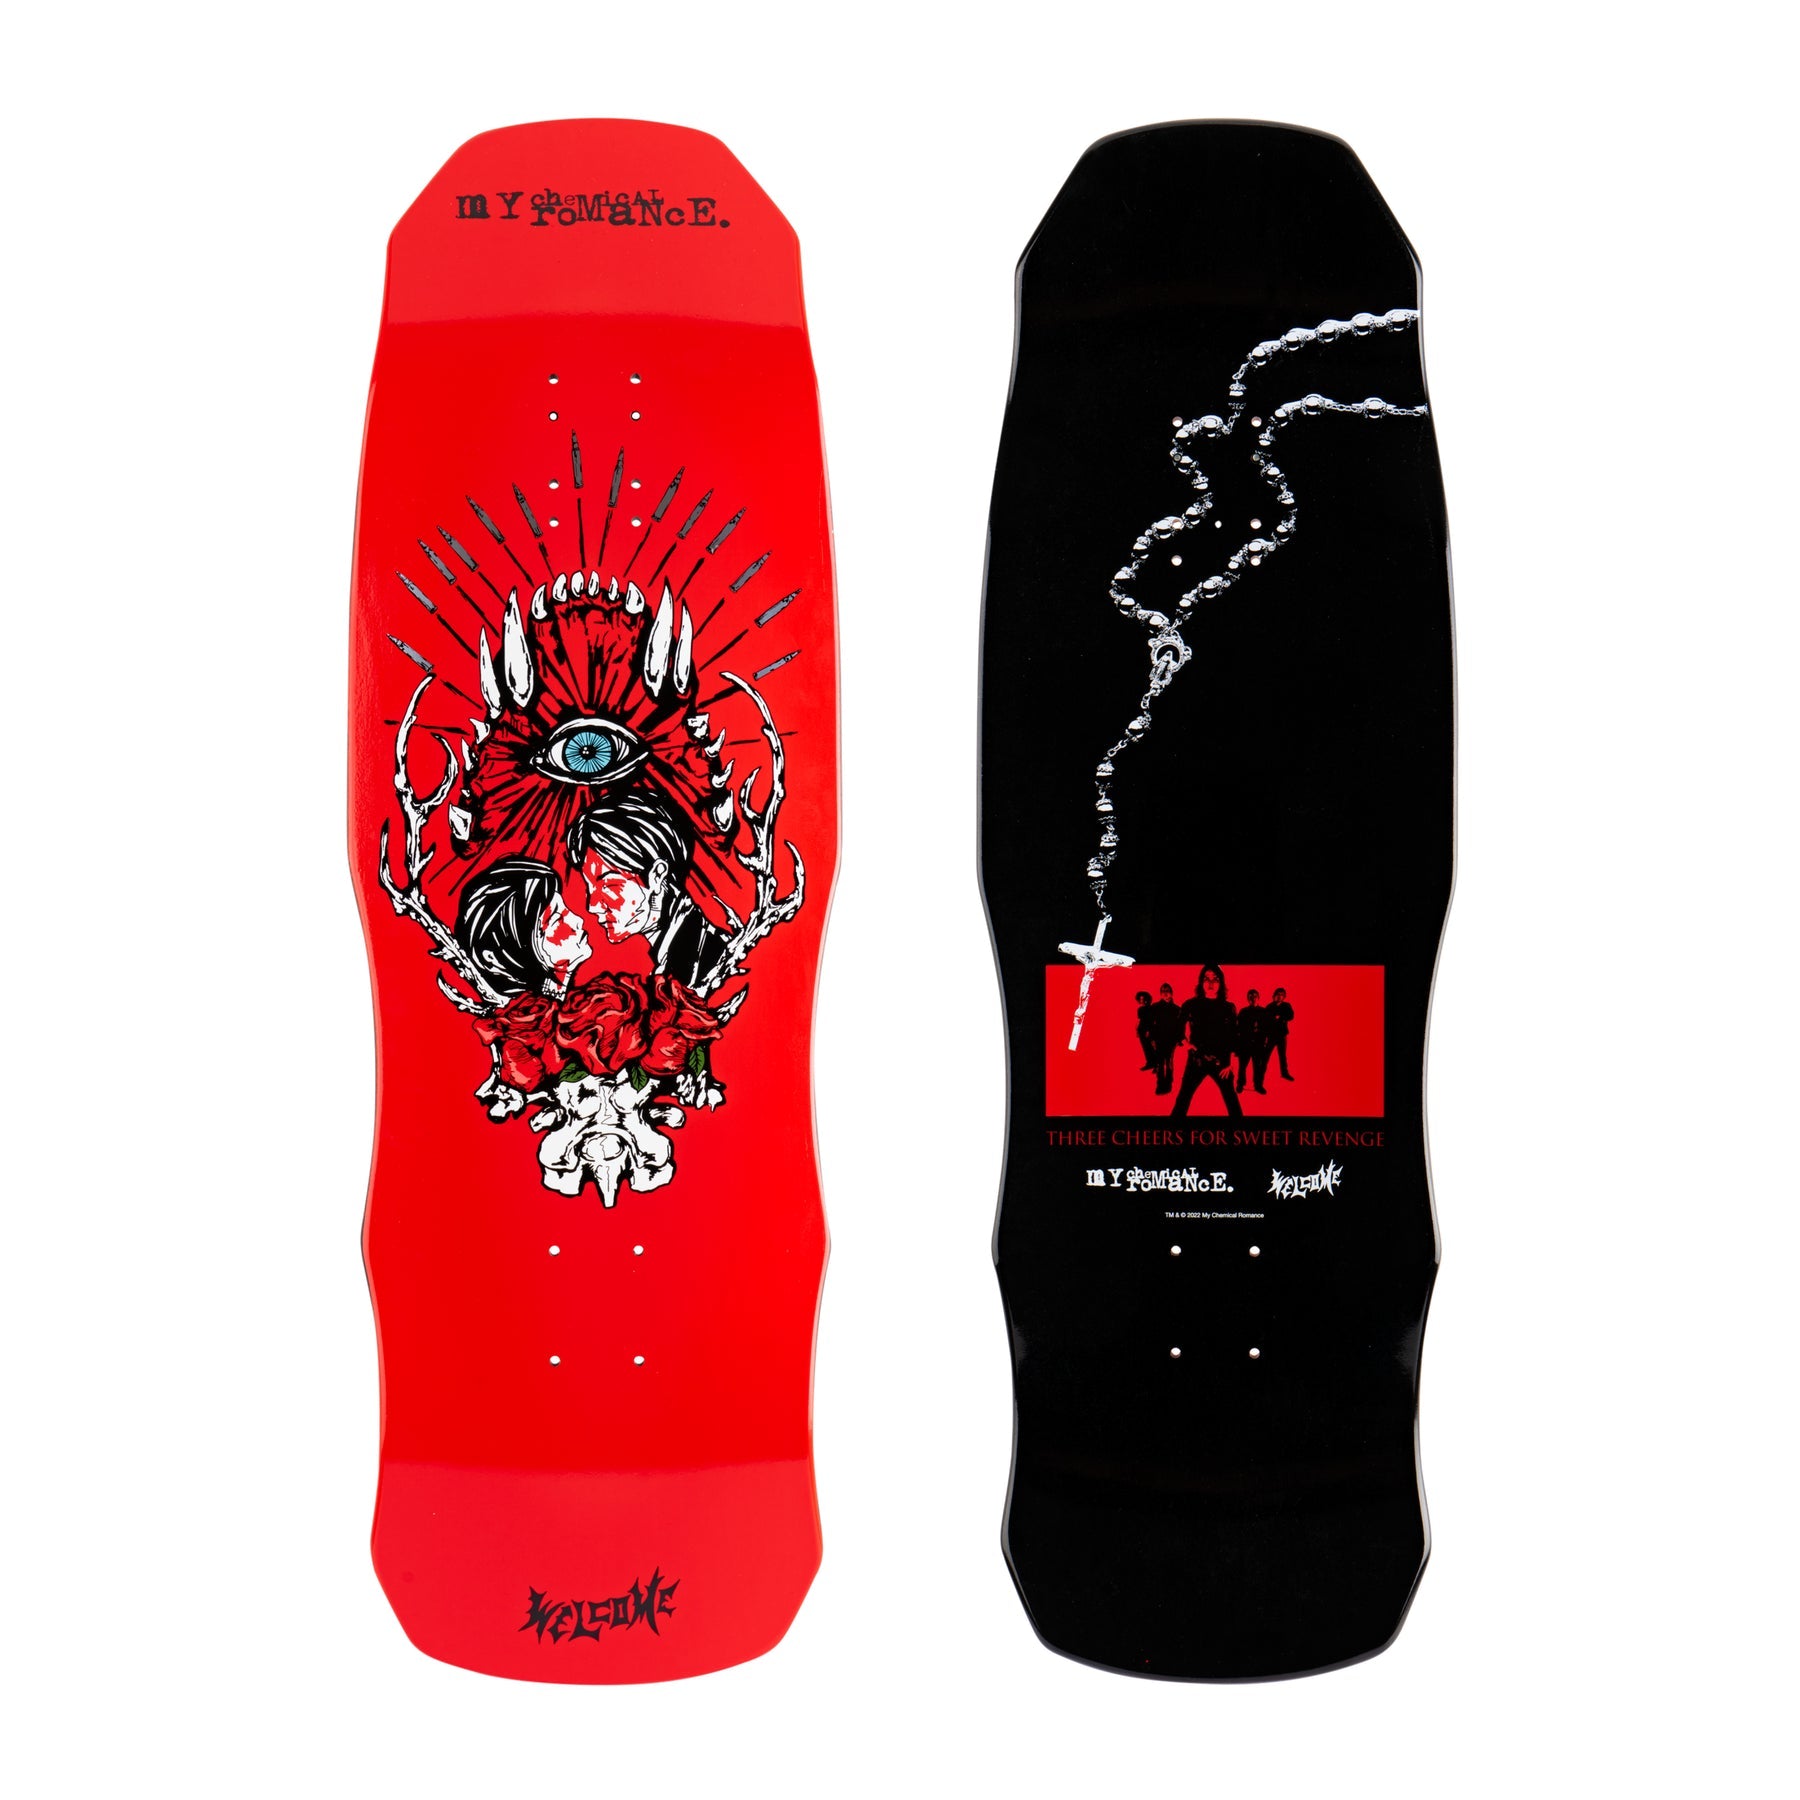 WELCOME X MY CHEMICAL ROMANCE DECK THREE CHEERS FOR SWEET REVENGE (9.75&quot;) DARK LORD - The Drive Skateshop